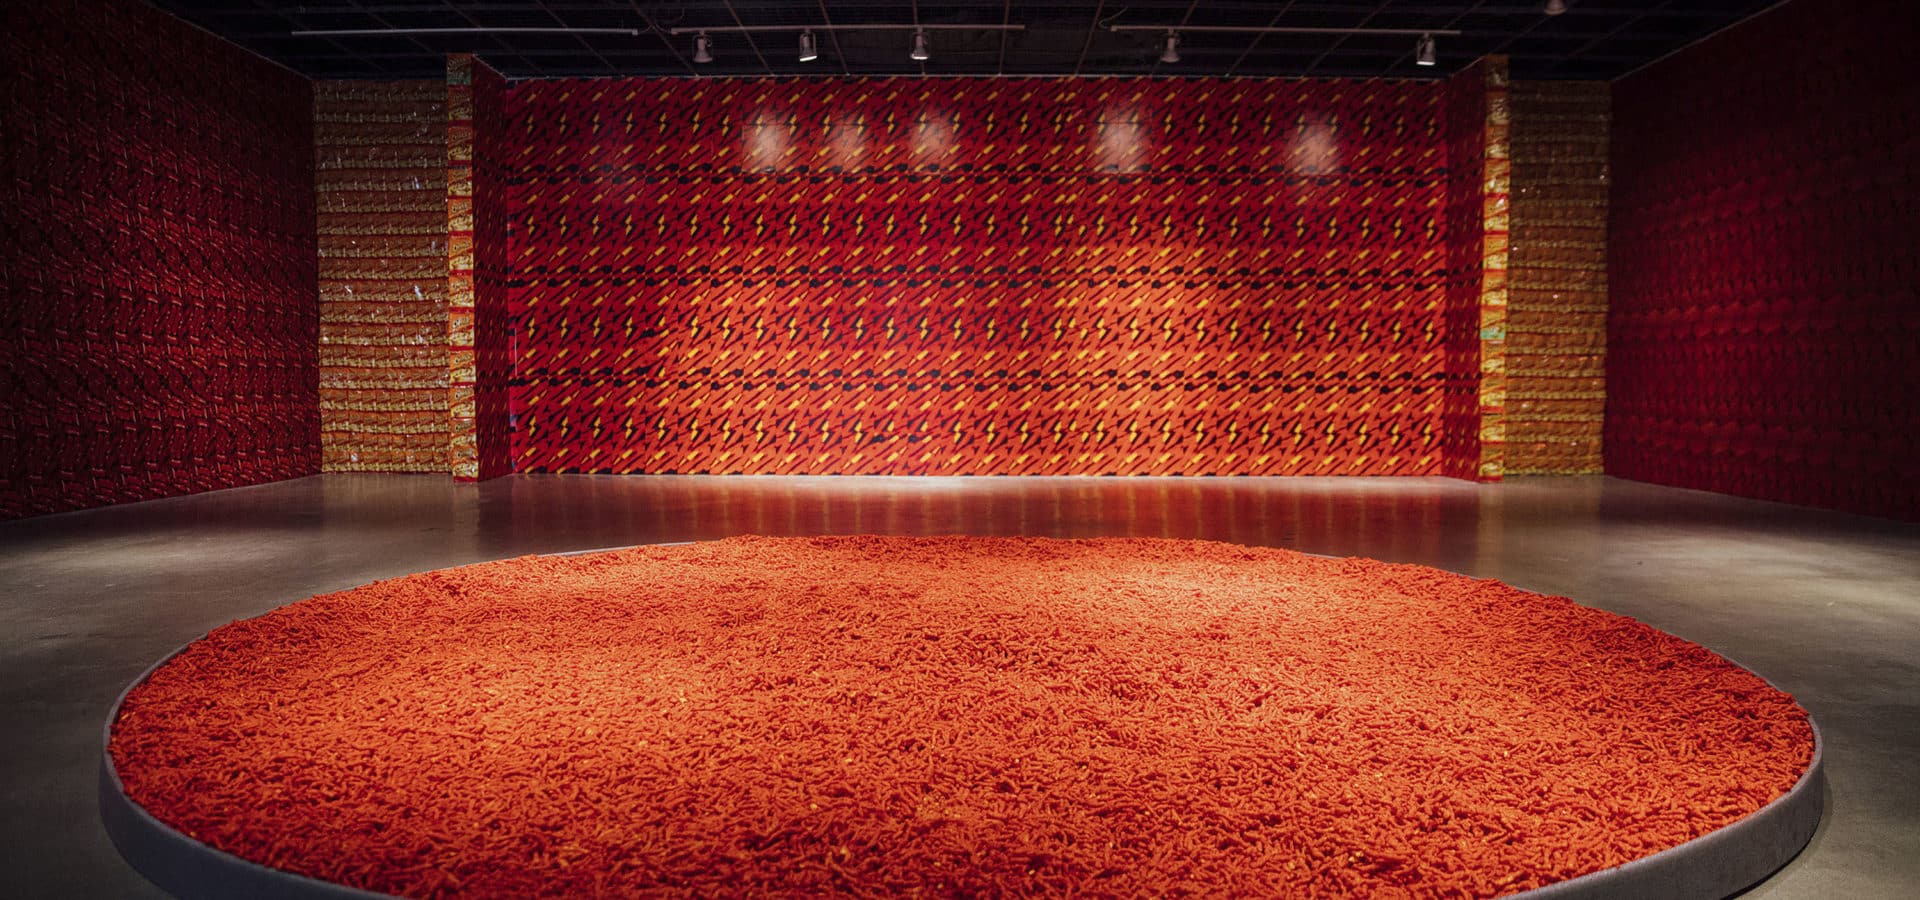 Gallery space with pool of Hot Cheetos on the floor and walls papered with hot cheeto bags